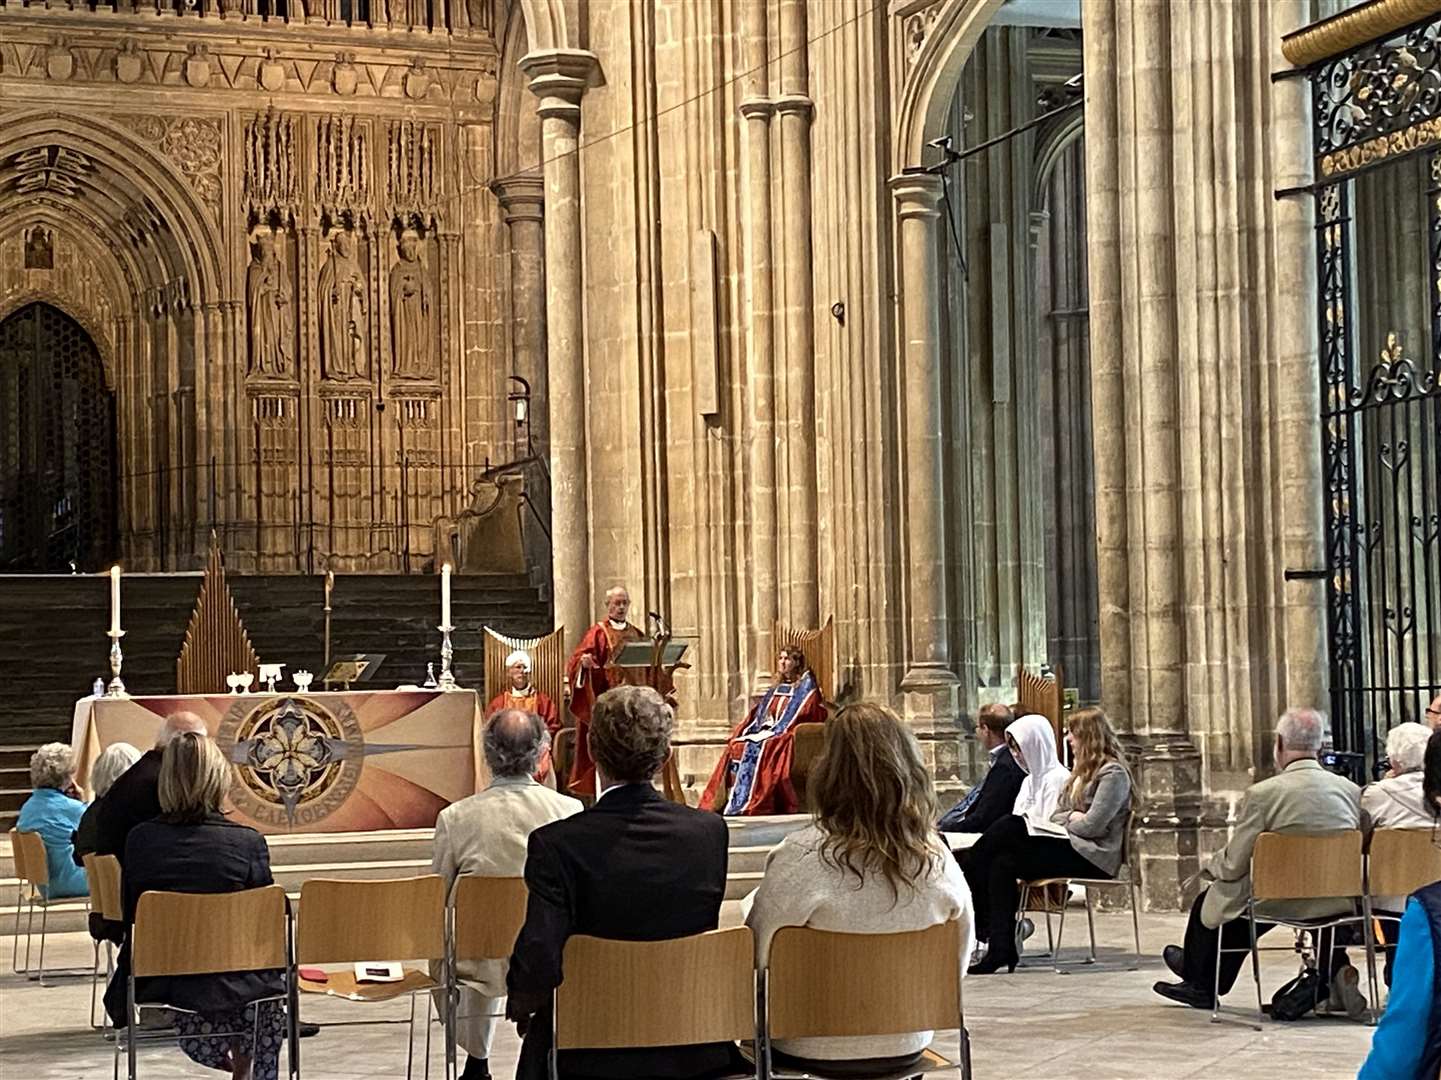 The service was led by Archbishop Justin Welby